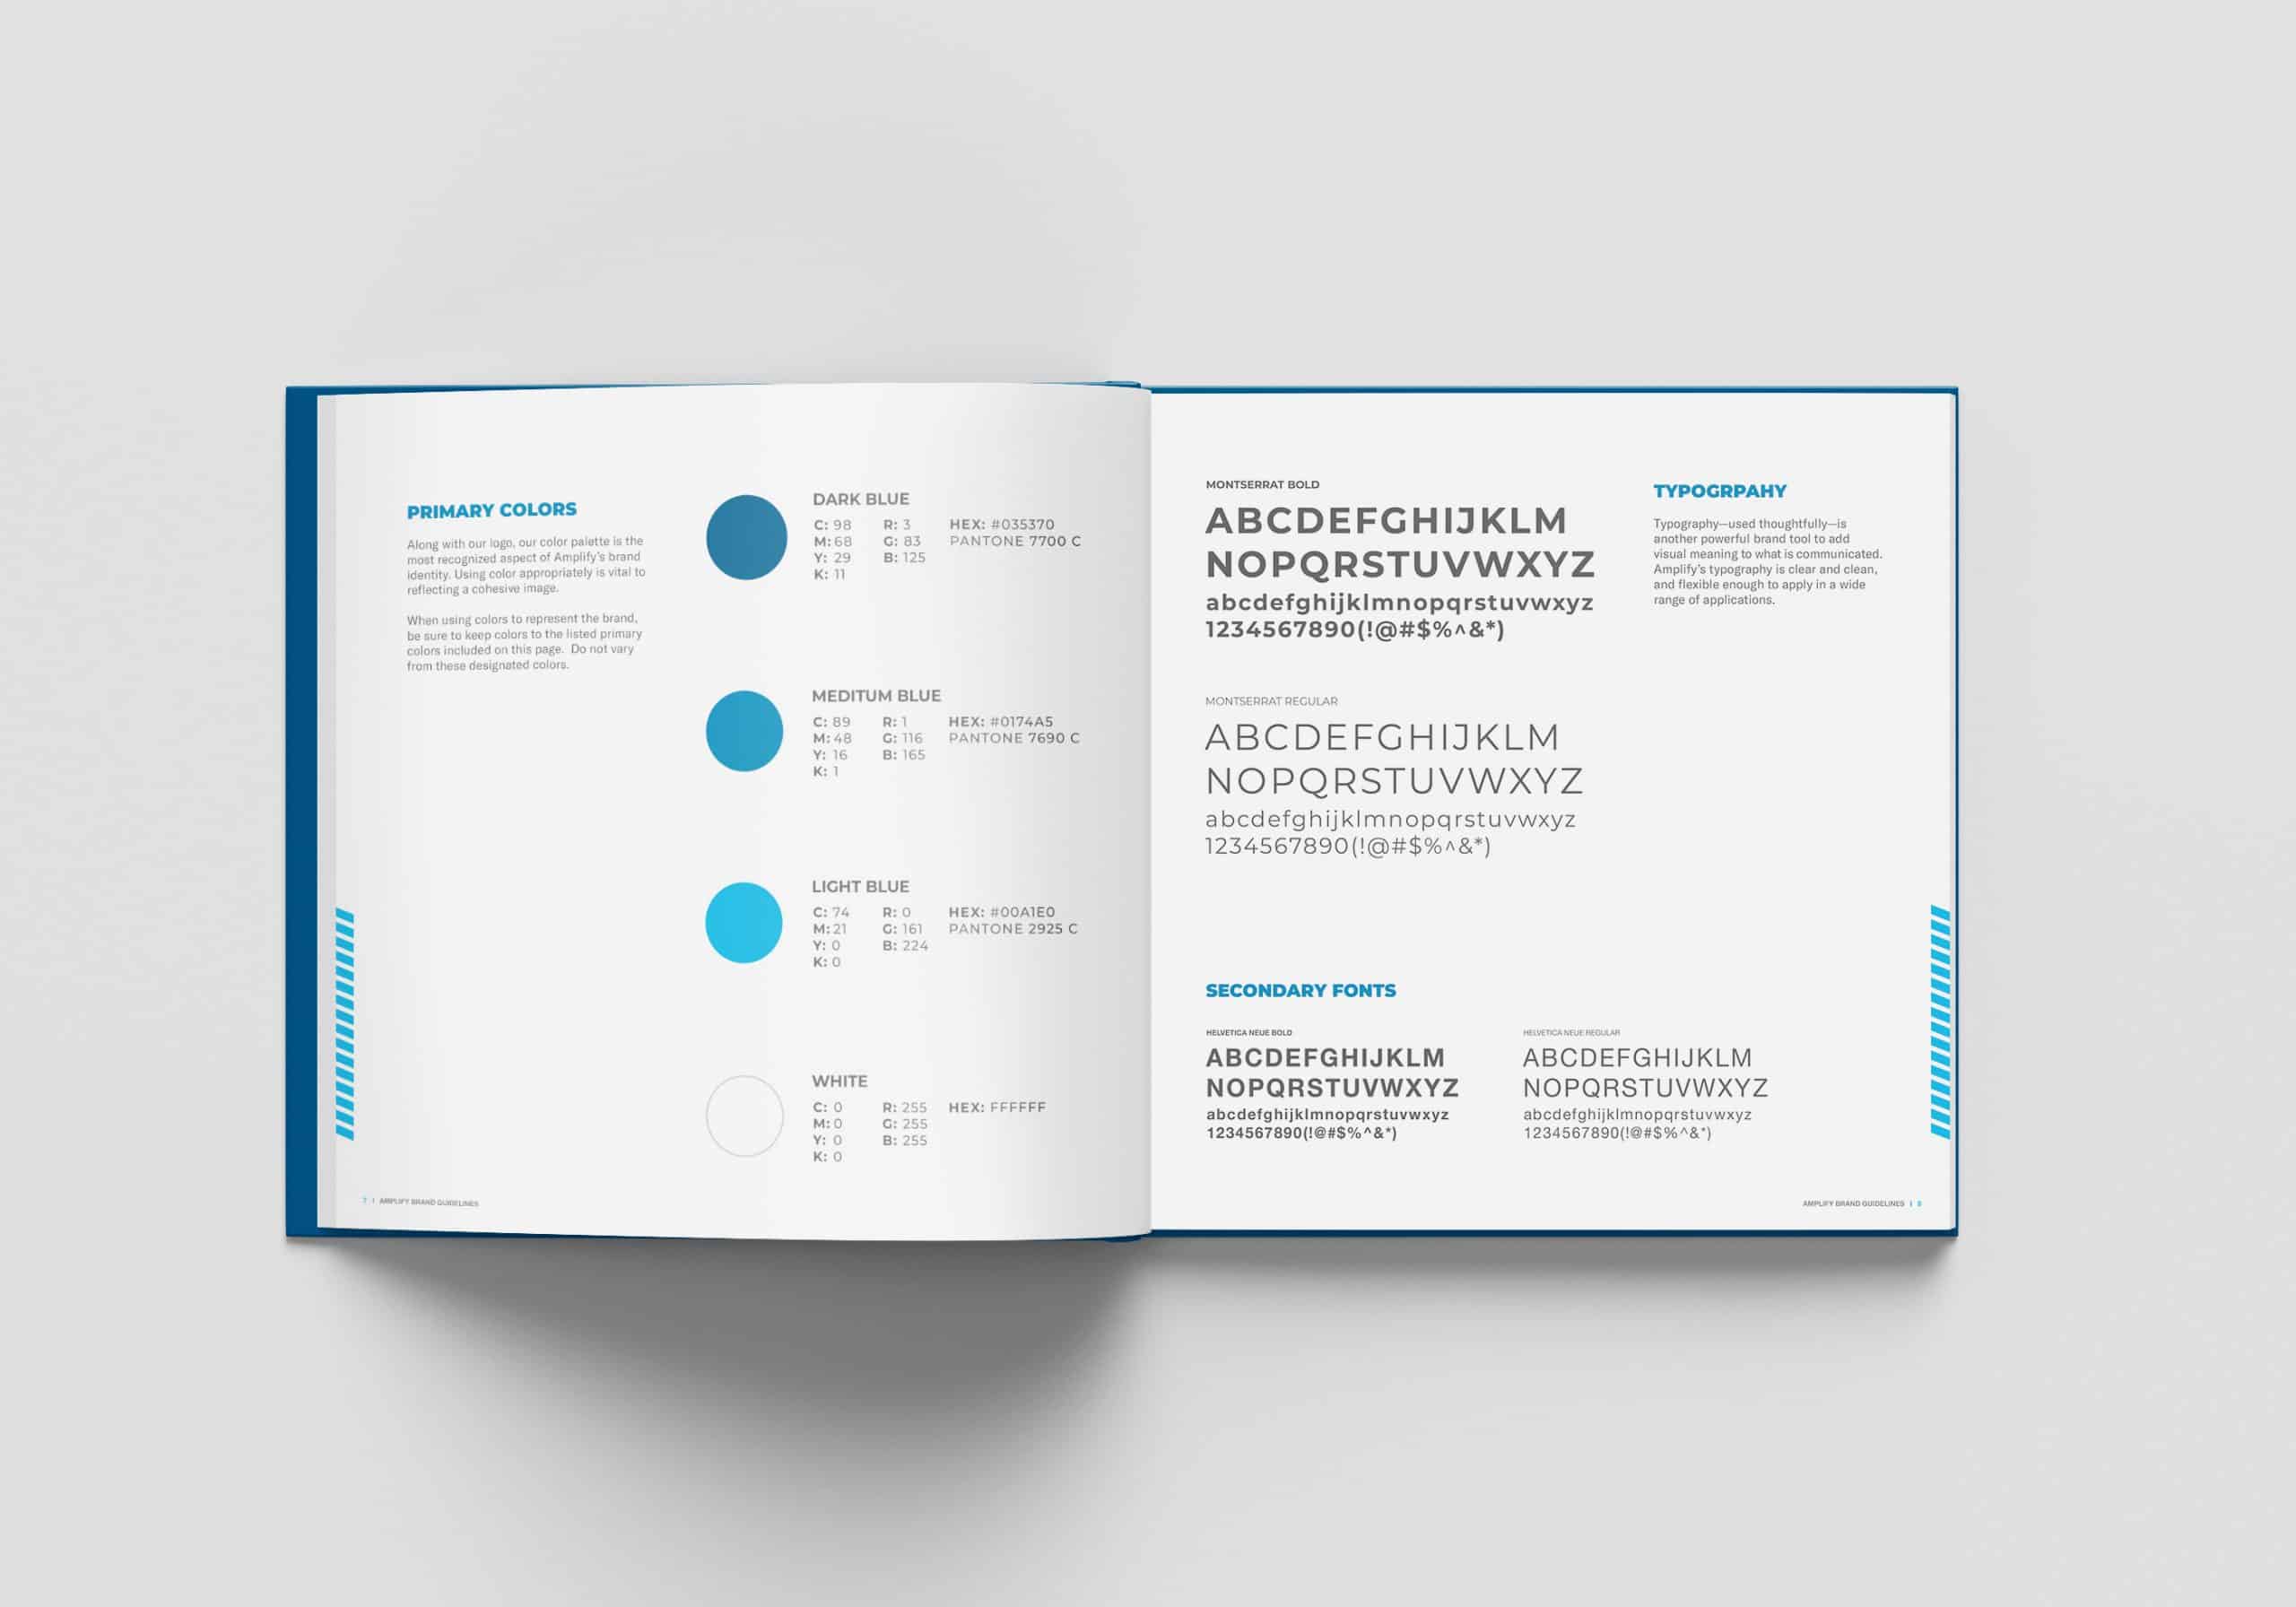 Amplify Brand Guidelines